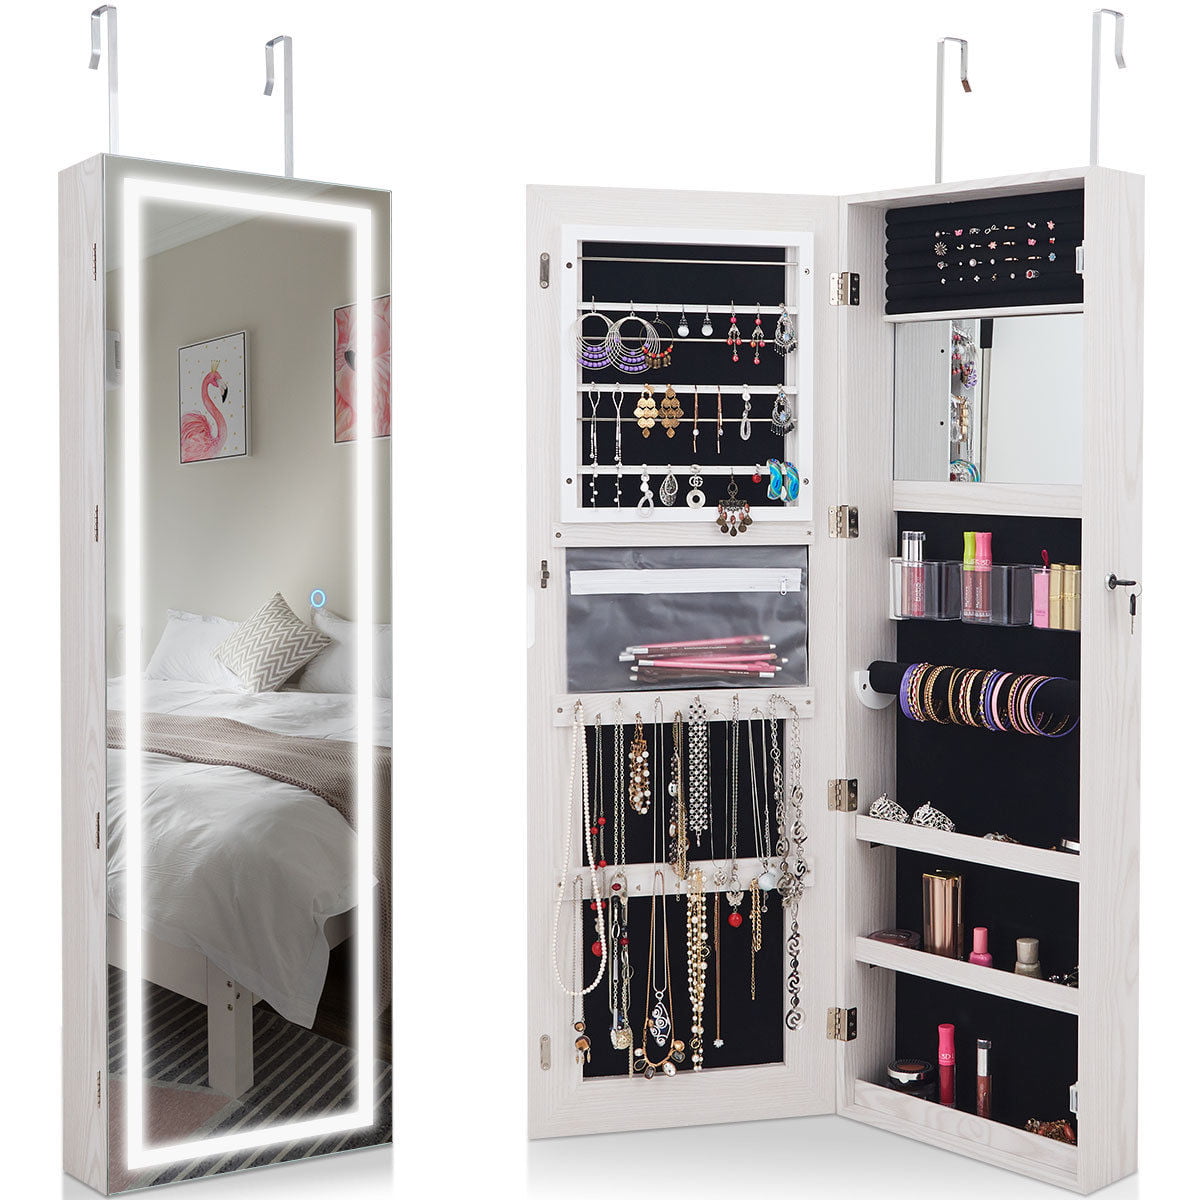 LED Mirrored Jewelry Cabinet Armoire Storage Organizer  Floor Stand Wall Mounted 